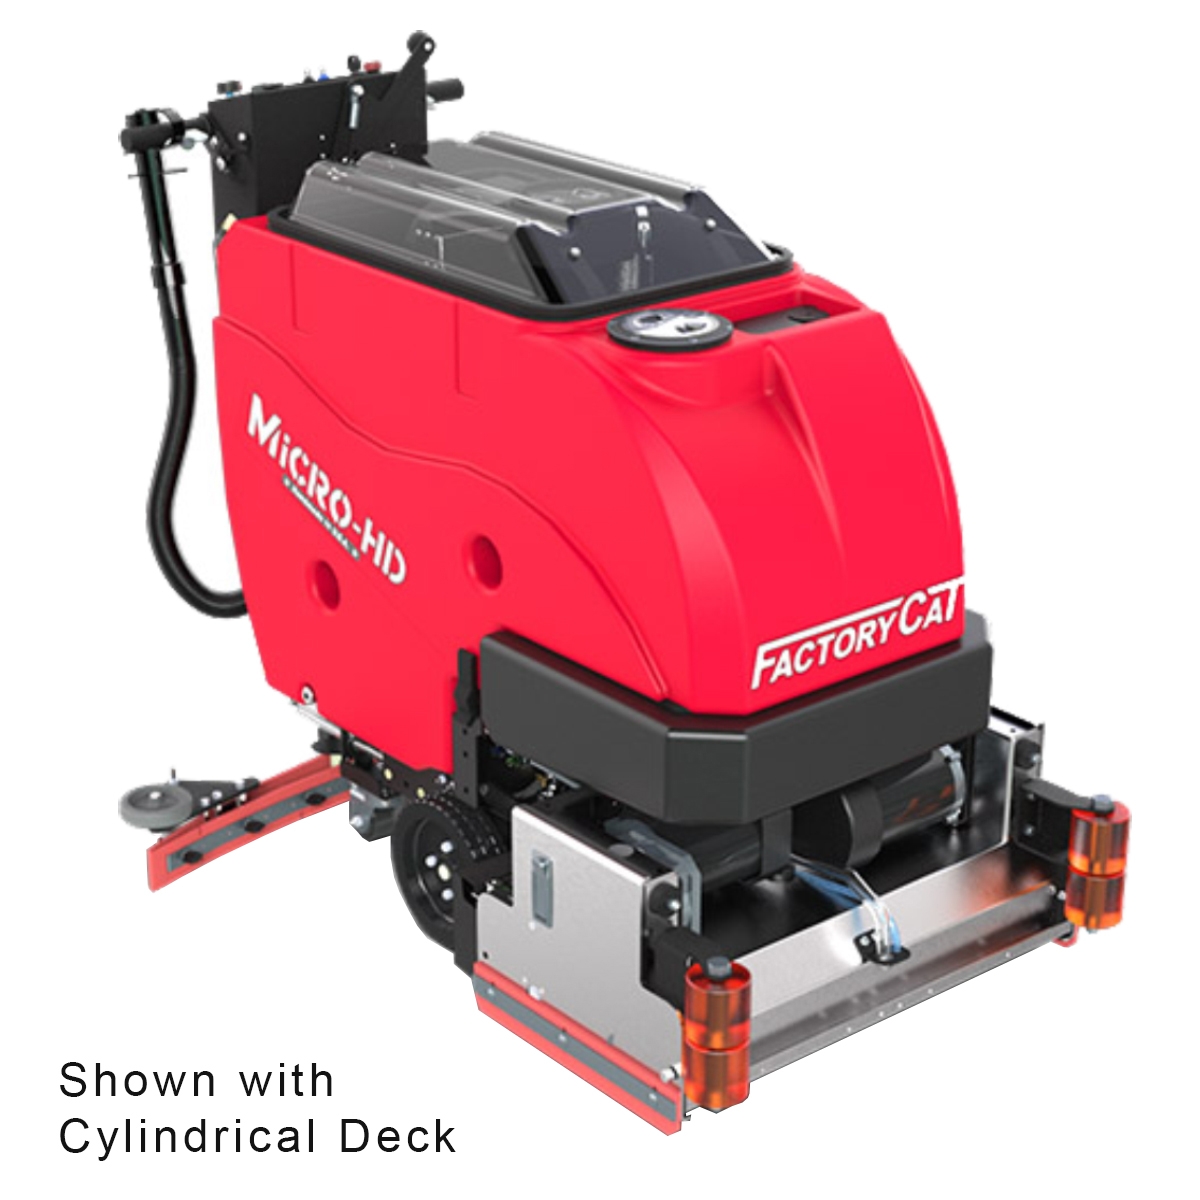 FactoryCat MICRO-HD Floor Scrubber is known for its simple design and durable construction, it is sitting at an angle showing a 3/4 view of the bright red and black machine.